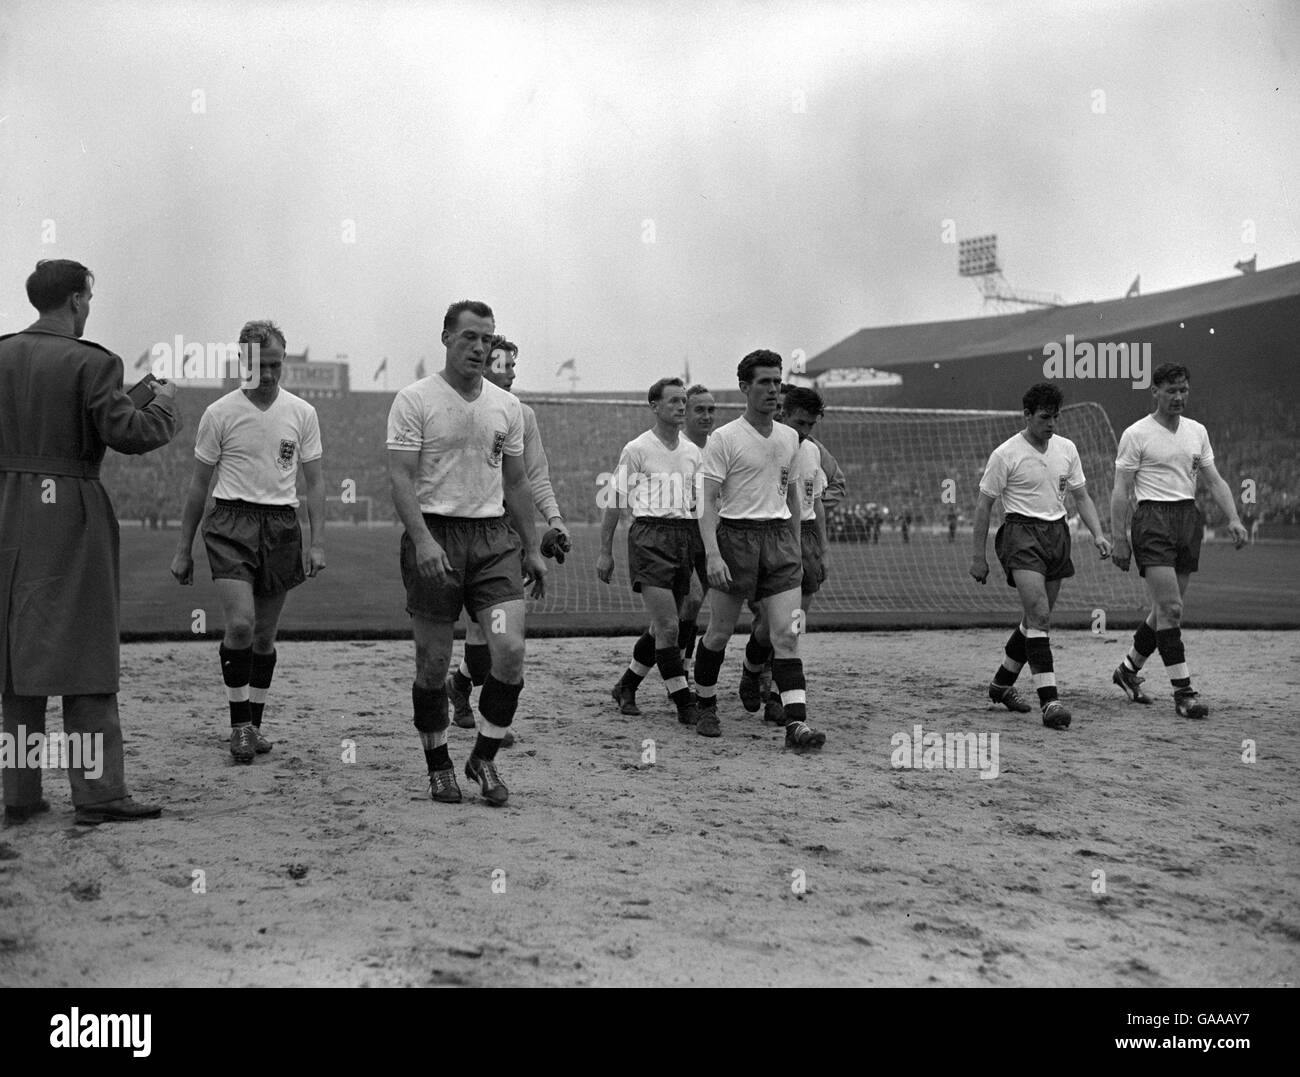 Tired but victorious England players walk off the pitch at Wembley after the match, beating the USSR 5-0. (l-r) Don Howe, Nat Lofthouse, Colin McDonald, Tom Finney, Billy Wright, Ronnie Clayton, Bryan Douglas, Graham Shaw and Bill Slater. Stock Photo